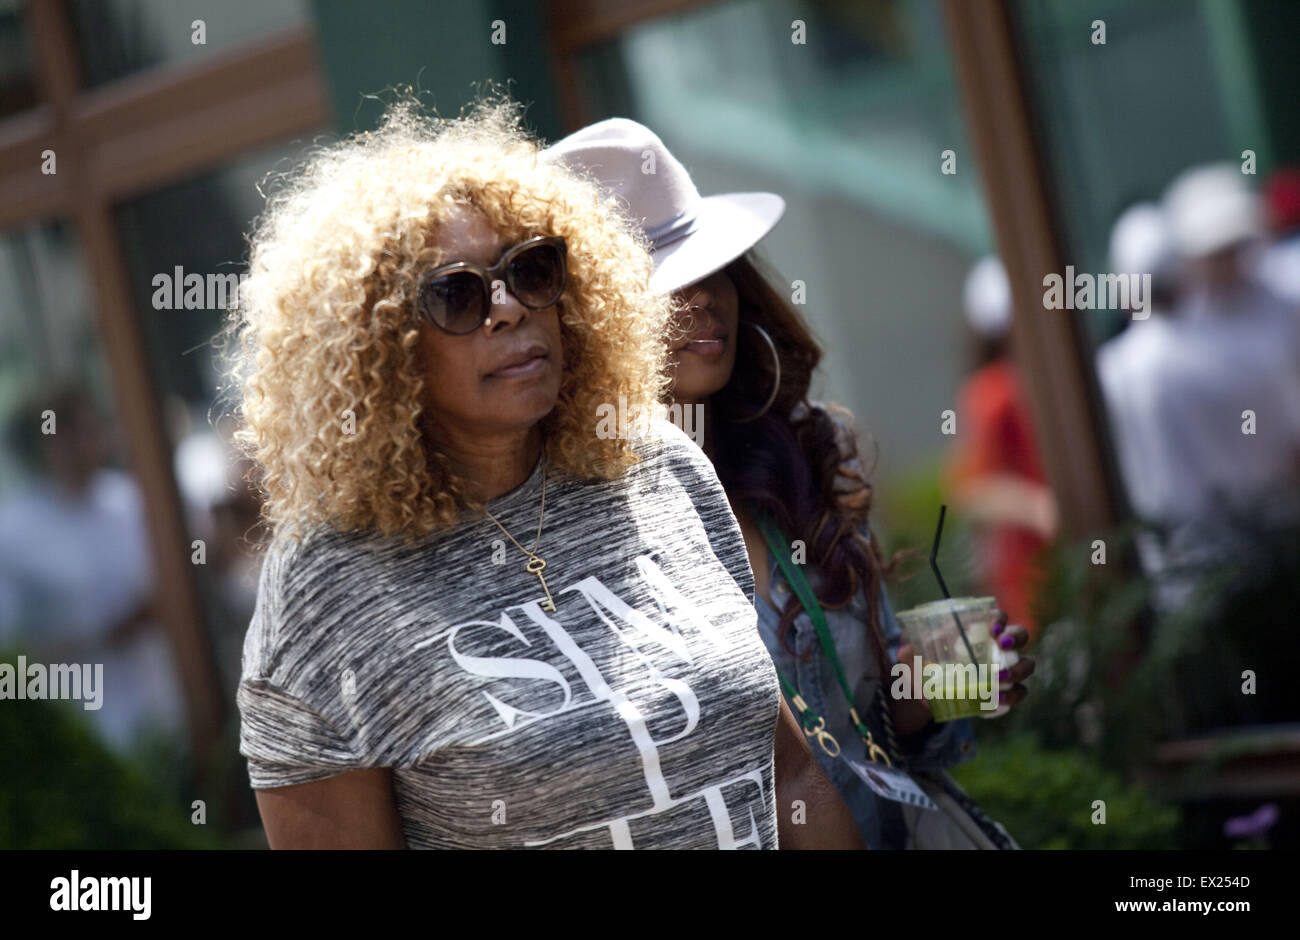 London, UK. 3rd July, 2015. Oracene Price, mother of Serena Willams, seen walking around Wimbledon.The Championships, Wimbledon or simply Wimbledon, is the oldest tennis tournament in the world, and is widely considered the most prestigious. It has been held at the All England Club in Wimbledon, London since 1877, London, UK. © Veronika Lukasova/ZUMA Wire/Alamy Live News Stock Photo